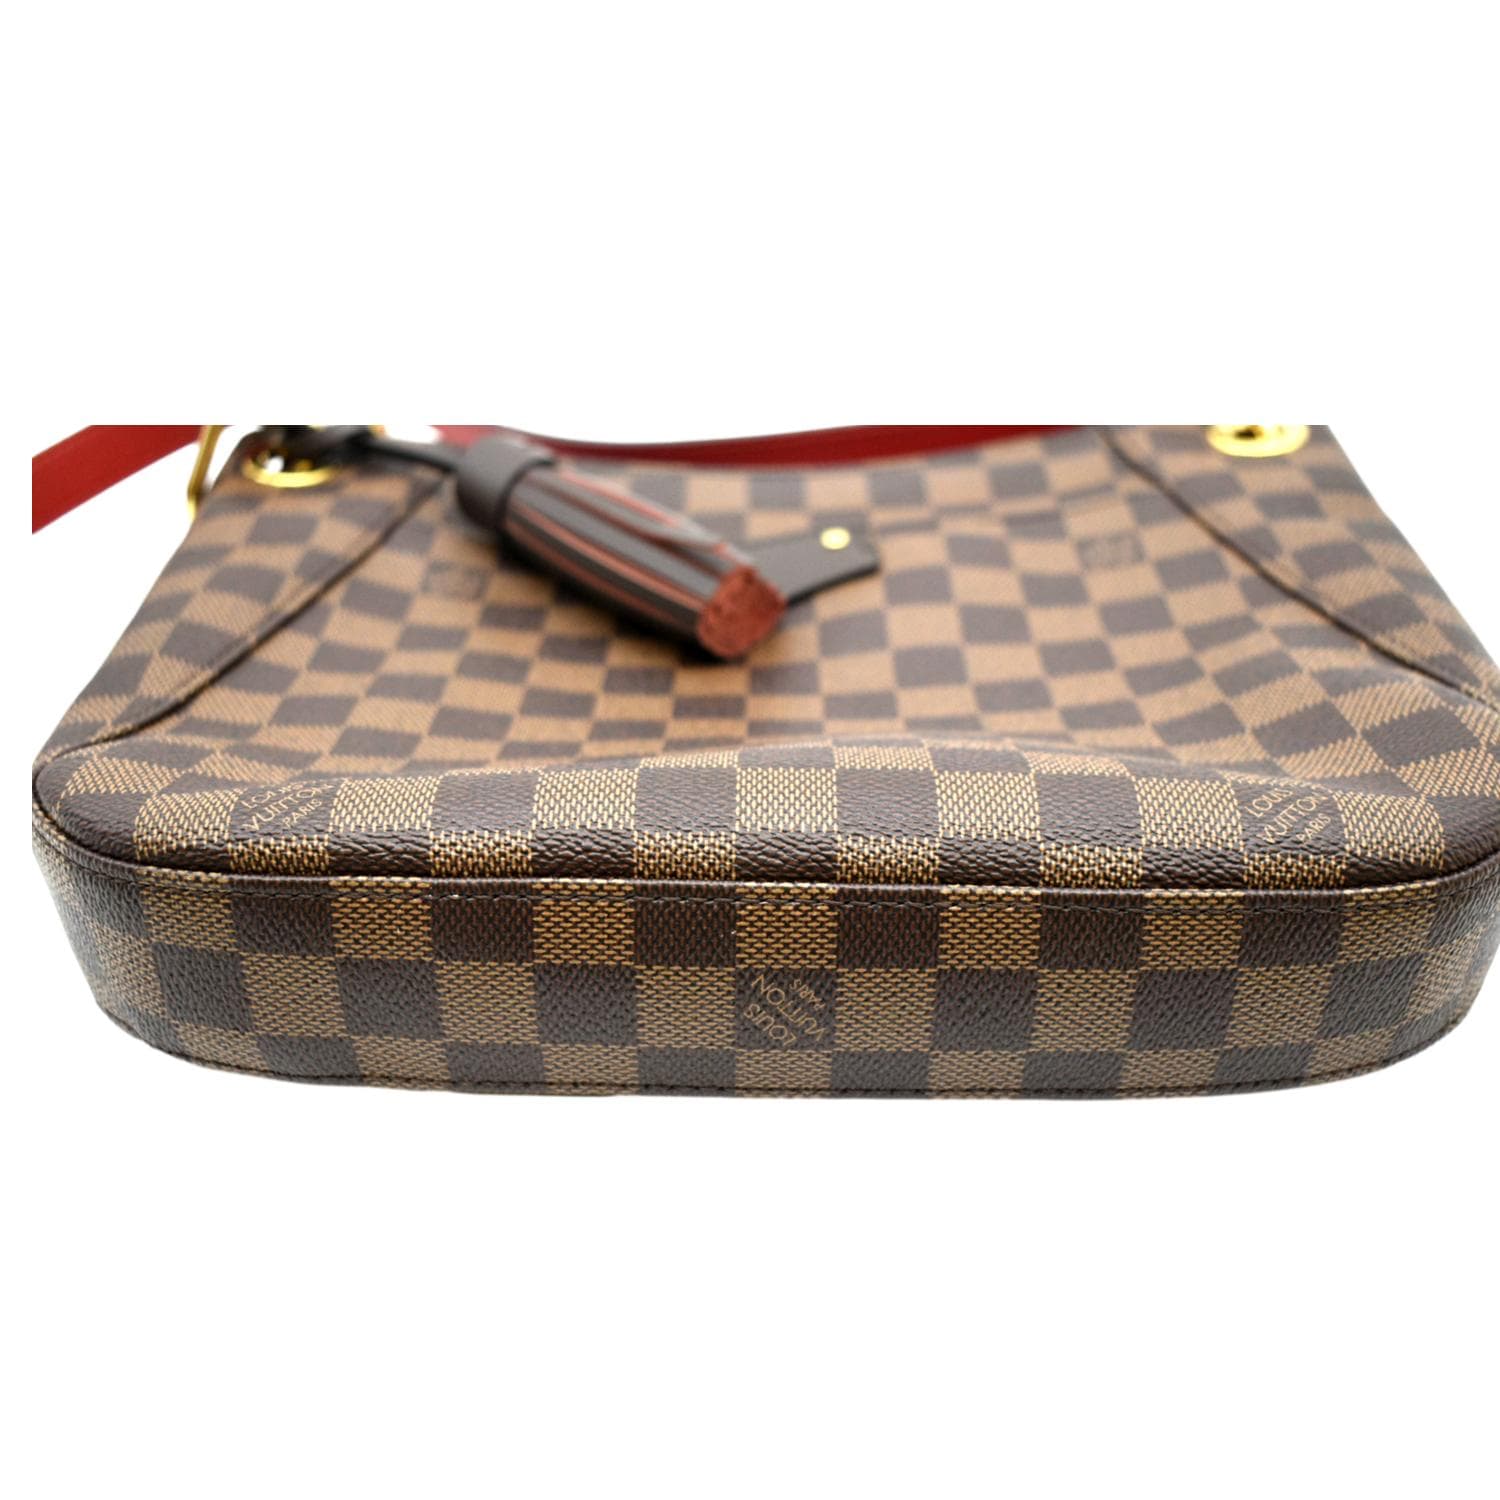 Louis Vuitton South Bank Besace Price